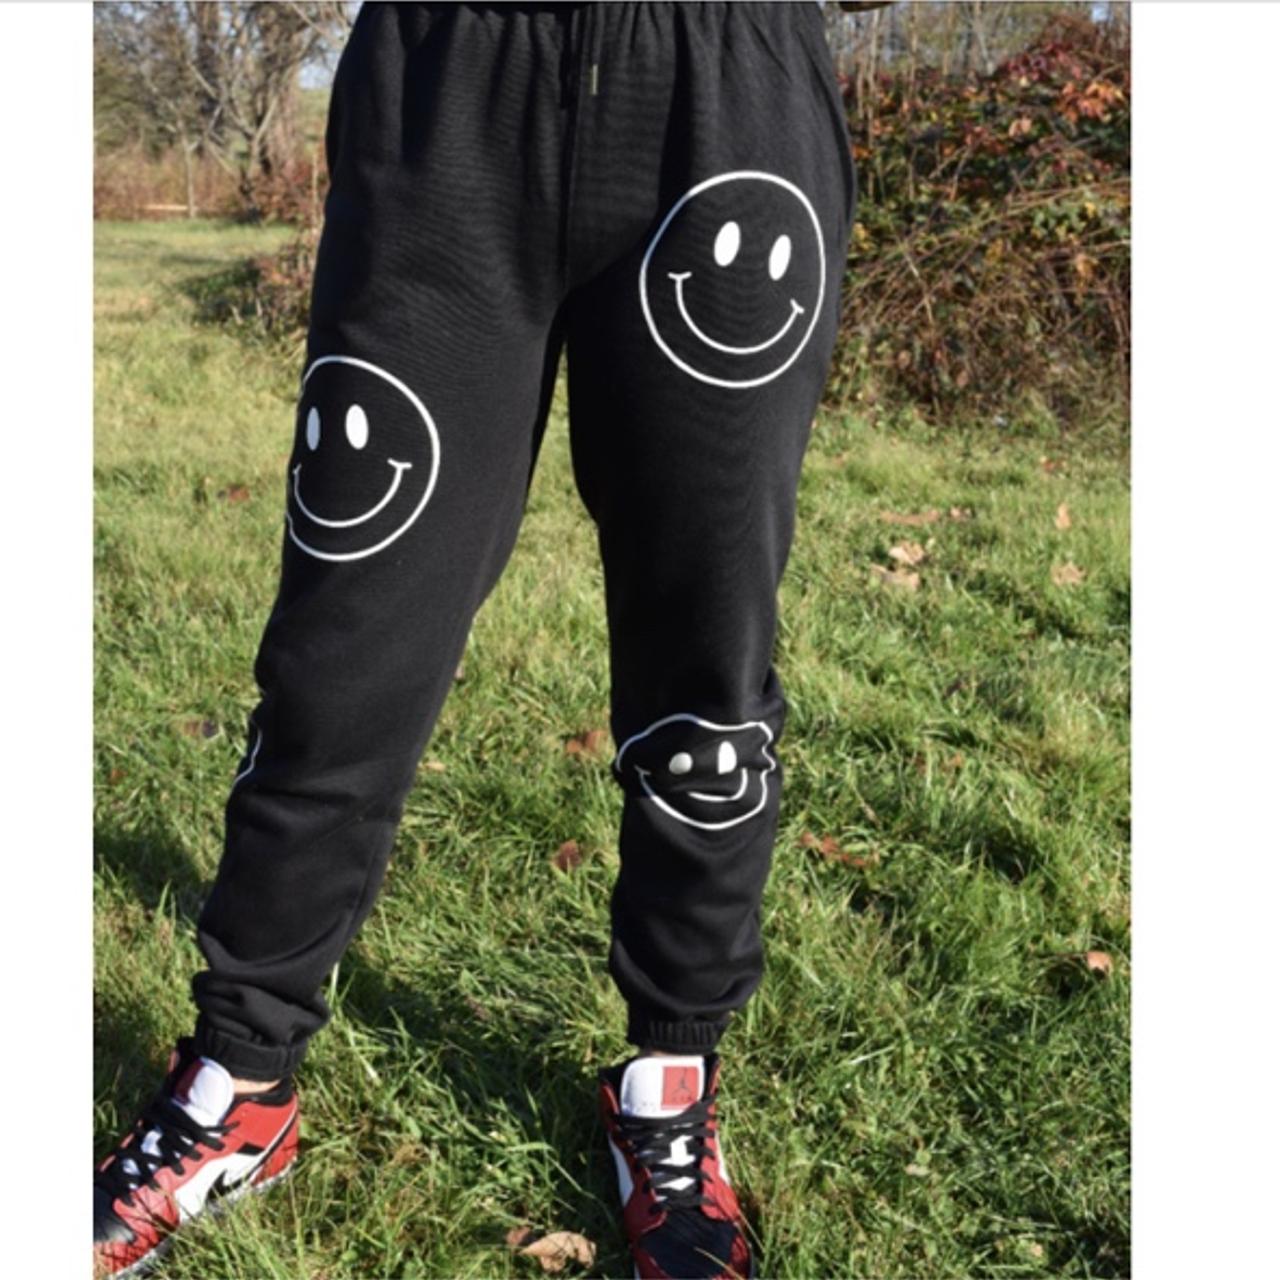 LOUIS VUITTON SWEATS! Get dripped out in these - Depop